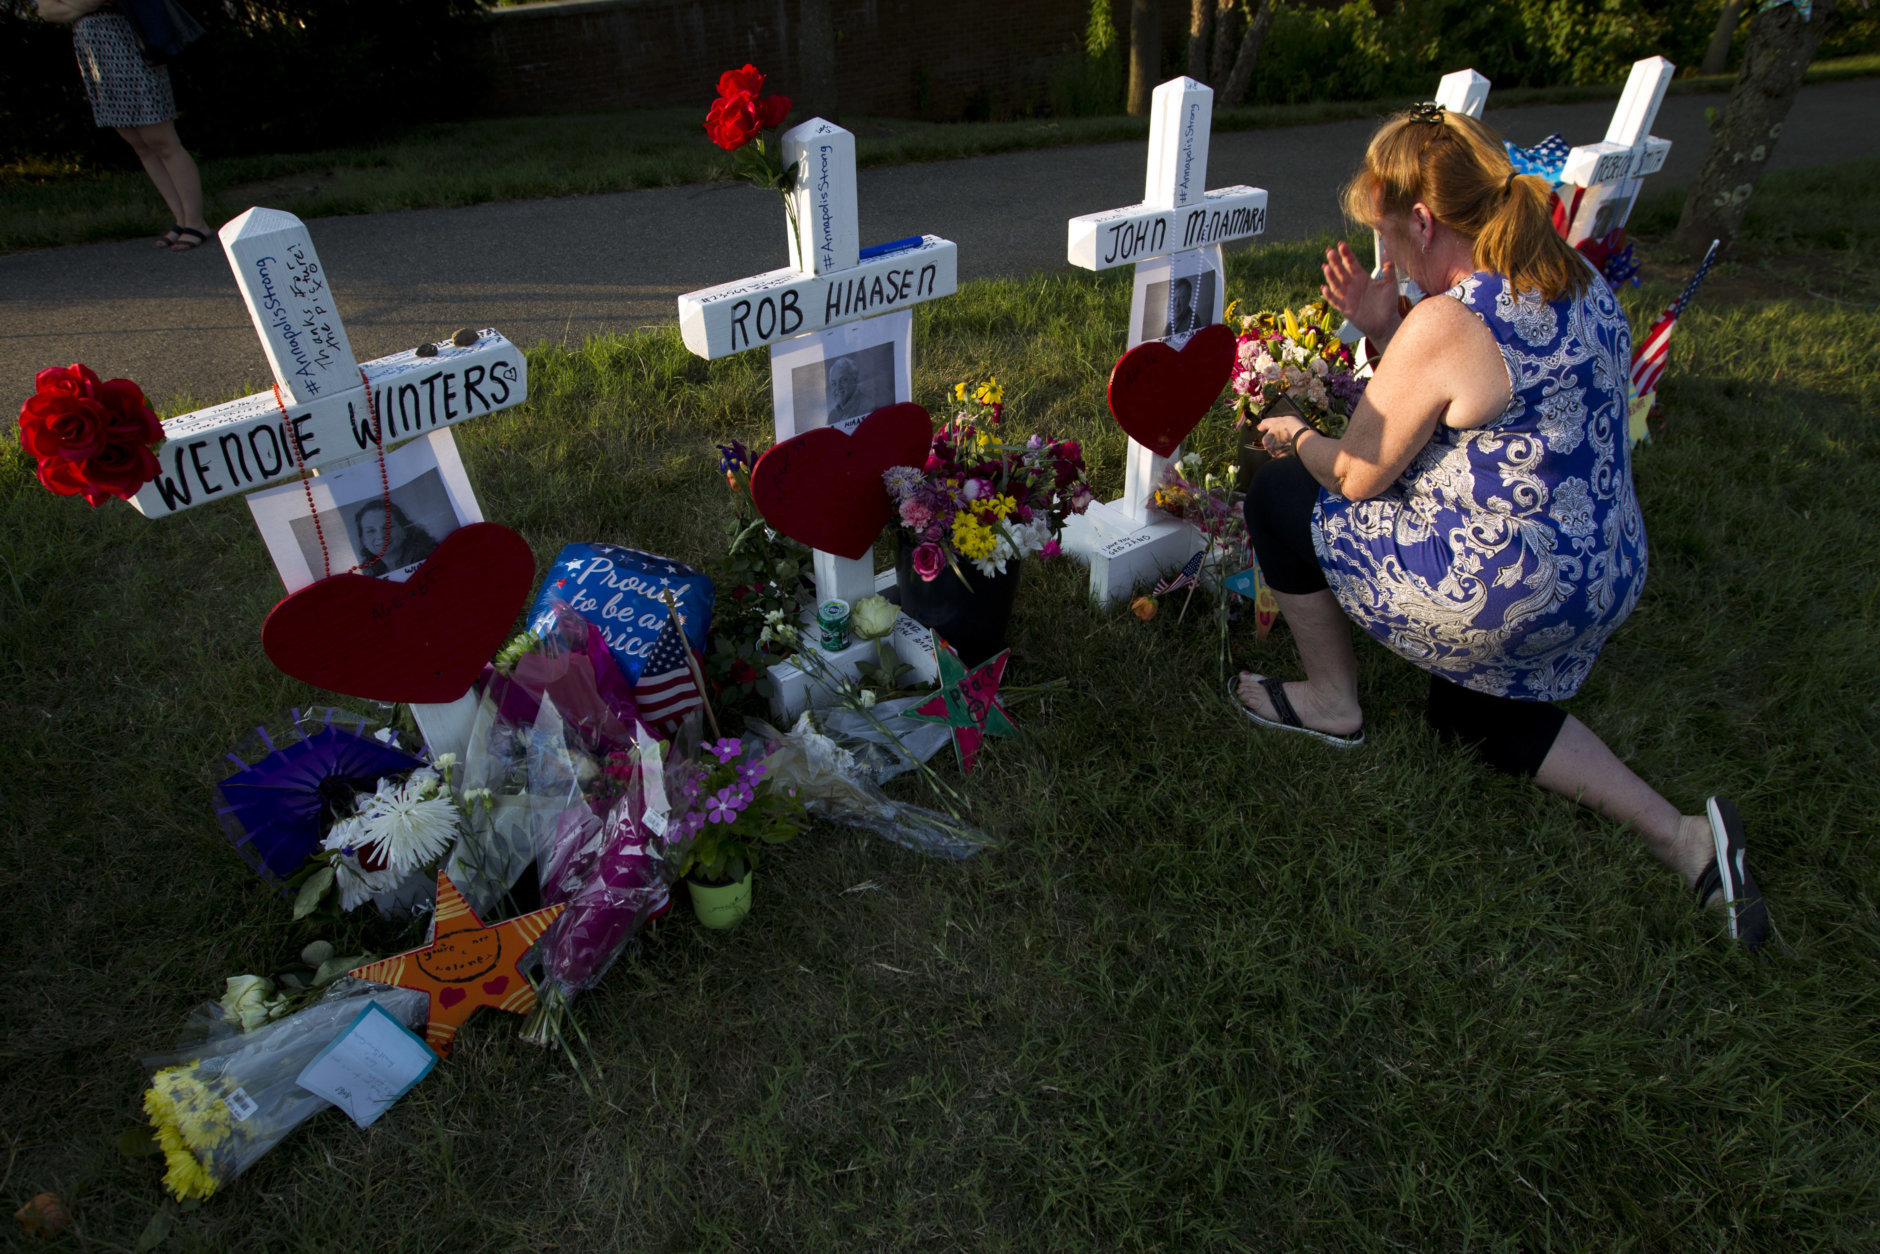 Colleen Joseph prays over the crosses at a makeshift memorial at the scene outside the office building housing The Capital Gazette newspaper in Annapolis, Md., on Sunday, July 1, 2018. Jarrod Ramos is charged with murder after police say he opened fire Thursday at the newspaper. (AP Photo/Jose Luis Magana)